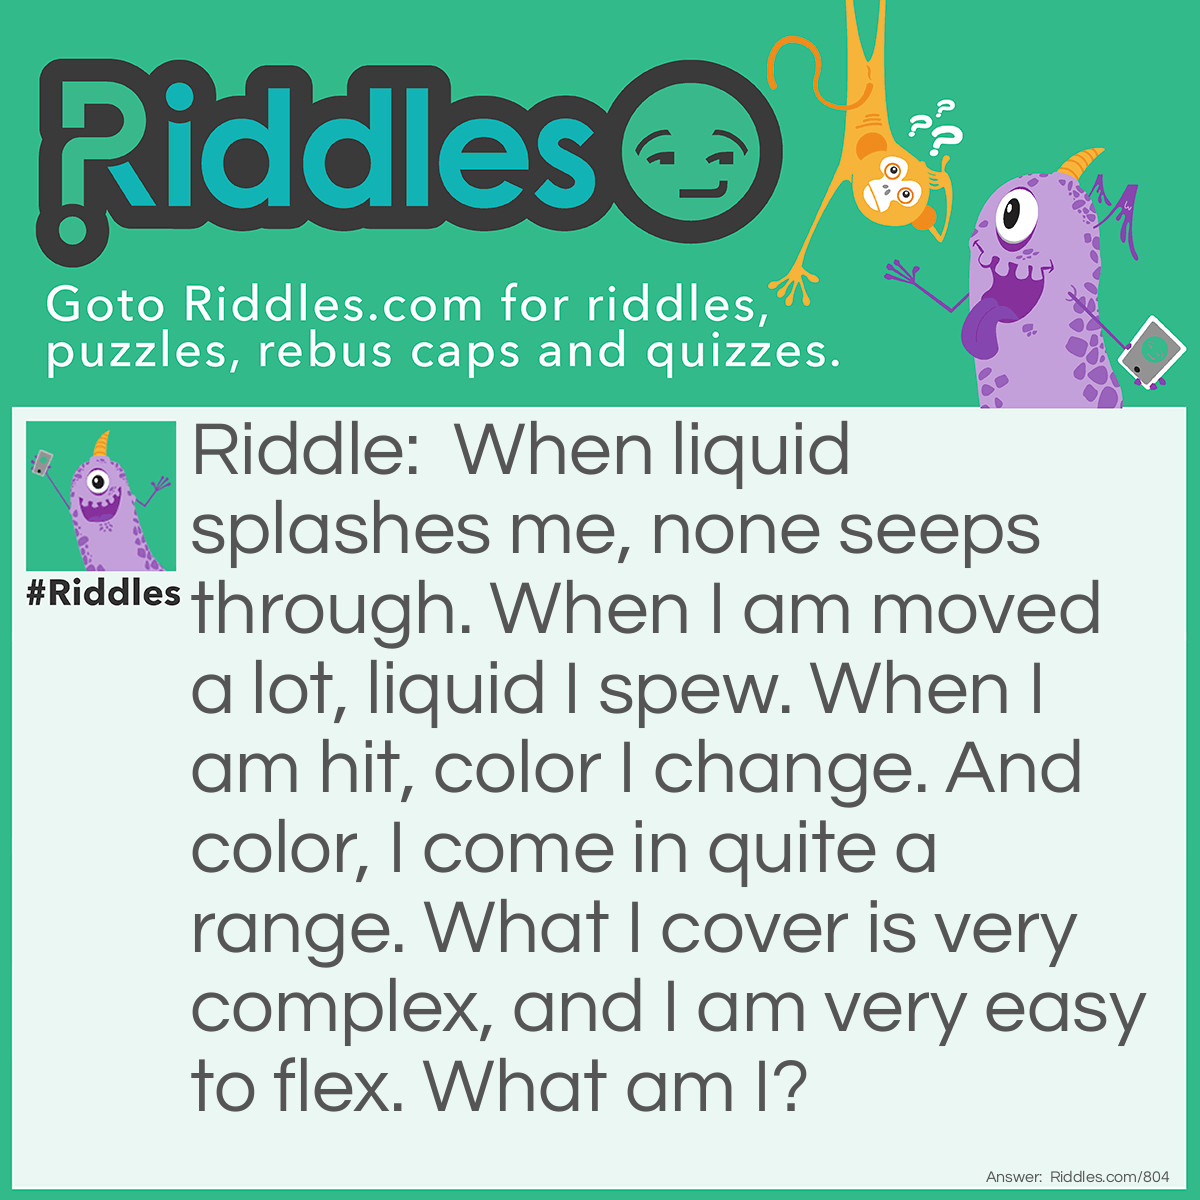 Riddle: When liquid splashes me, none seeps through. When I am moved a lot, liquid I spew. When I am hit, color I change. And color, I come in quite a range. What I cover is very complex, and I am very easy to flex. What am I? Answer: I'm skin!